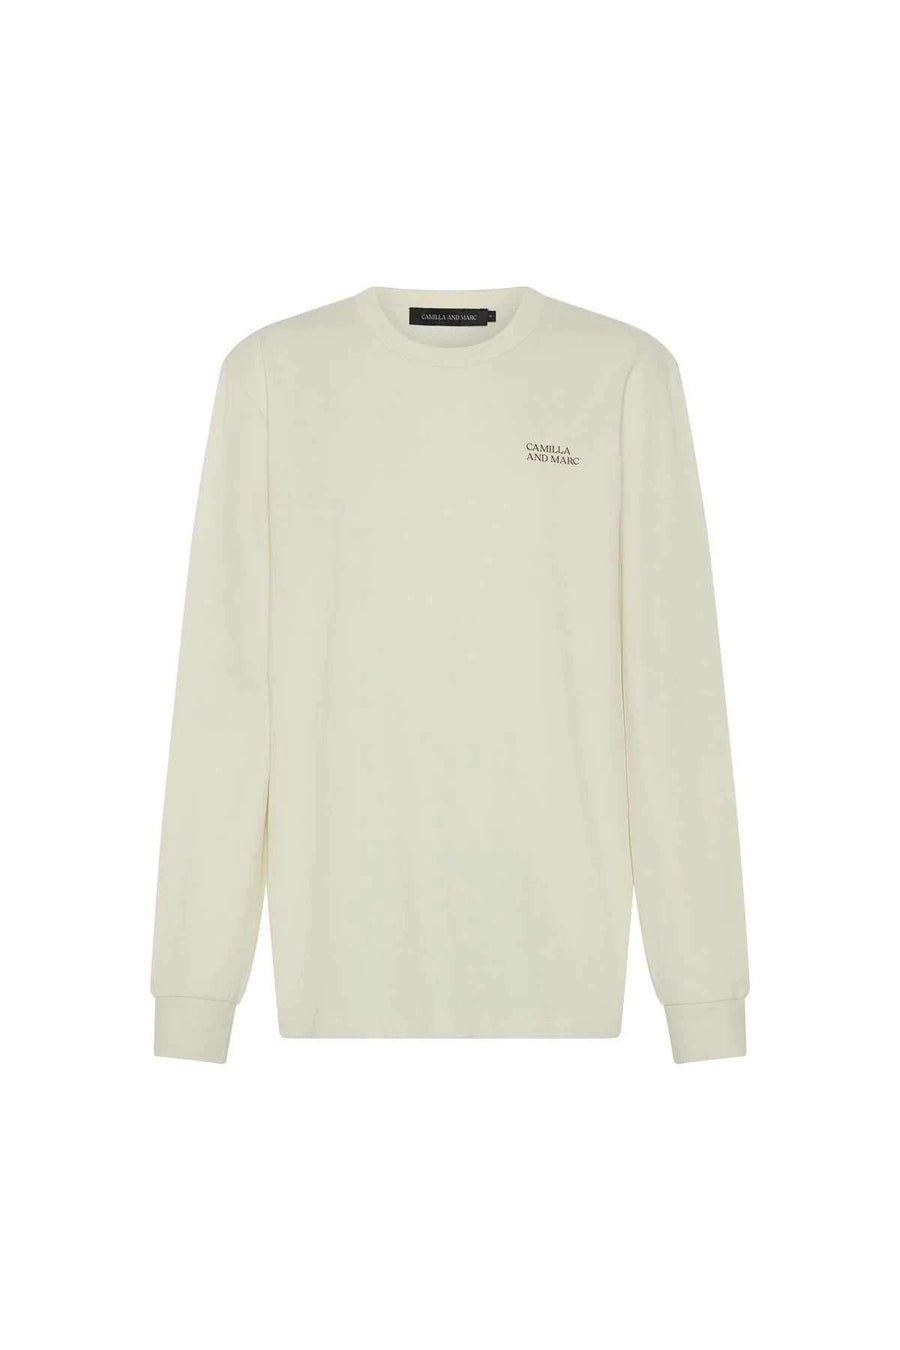 Camila and Marc Sutton Long Sleeve Sweater Tee White